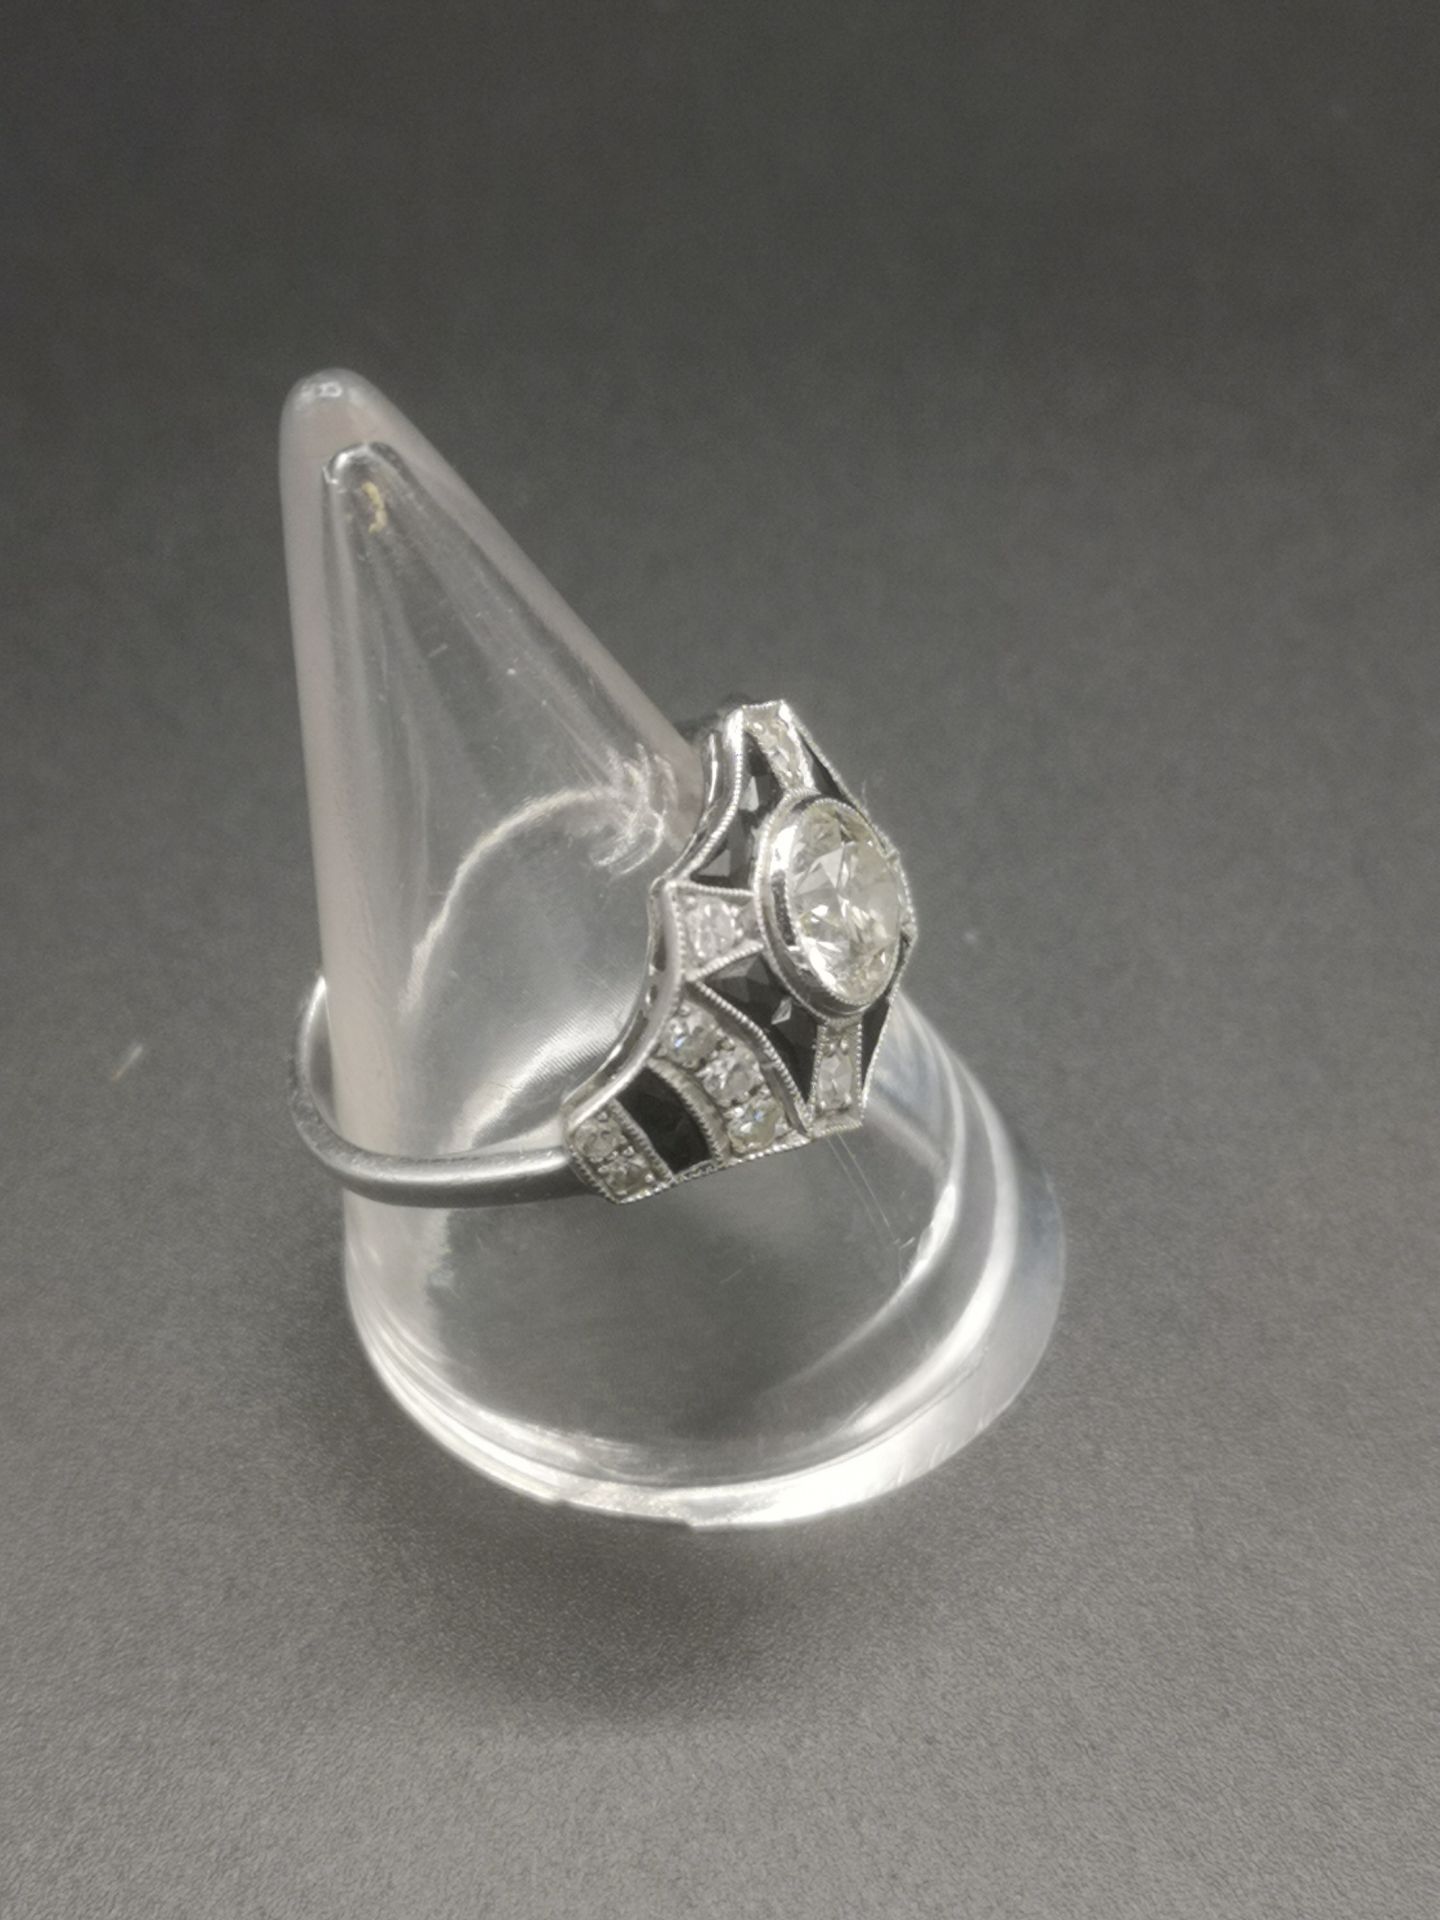 18ct white gold, diamond and black onyx ring - Image 3 of 7